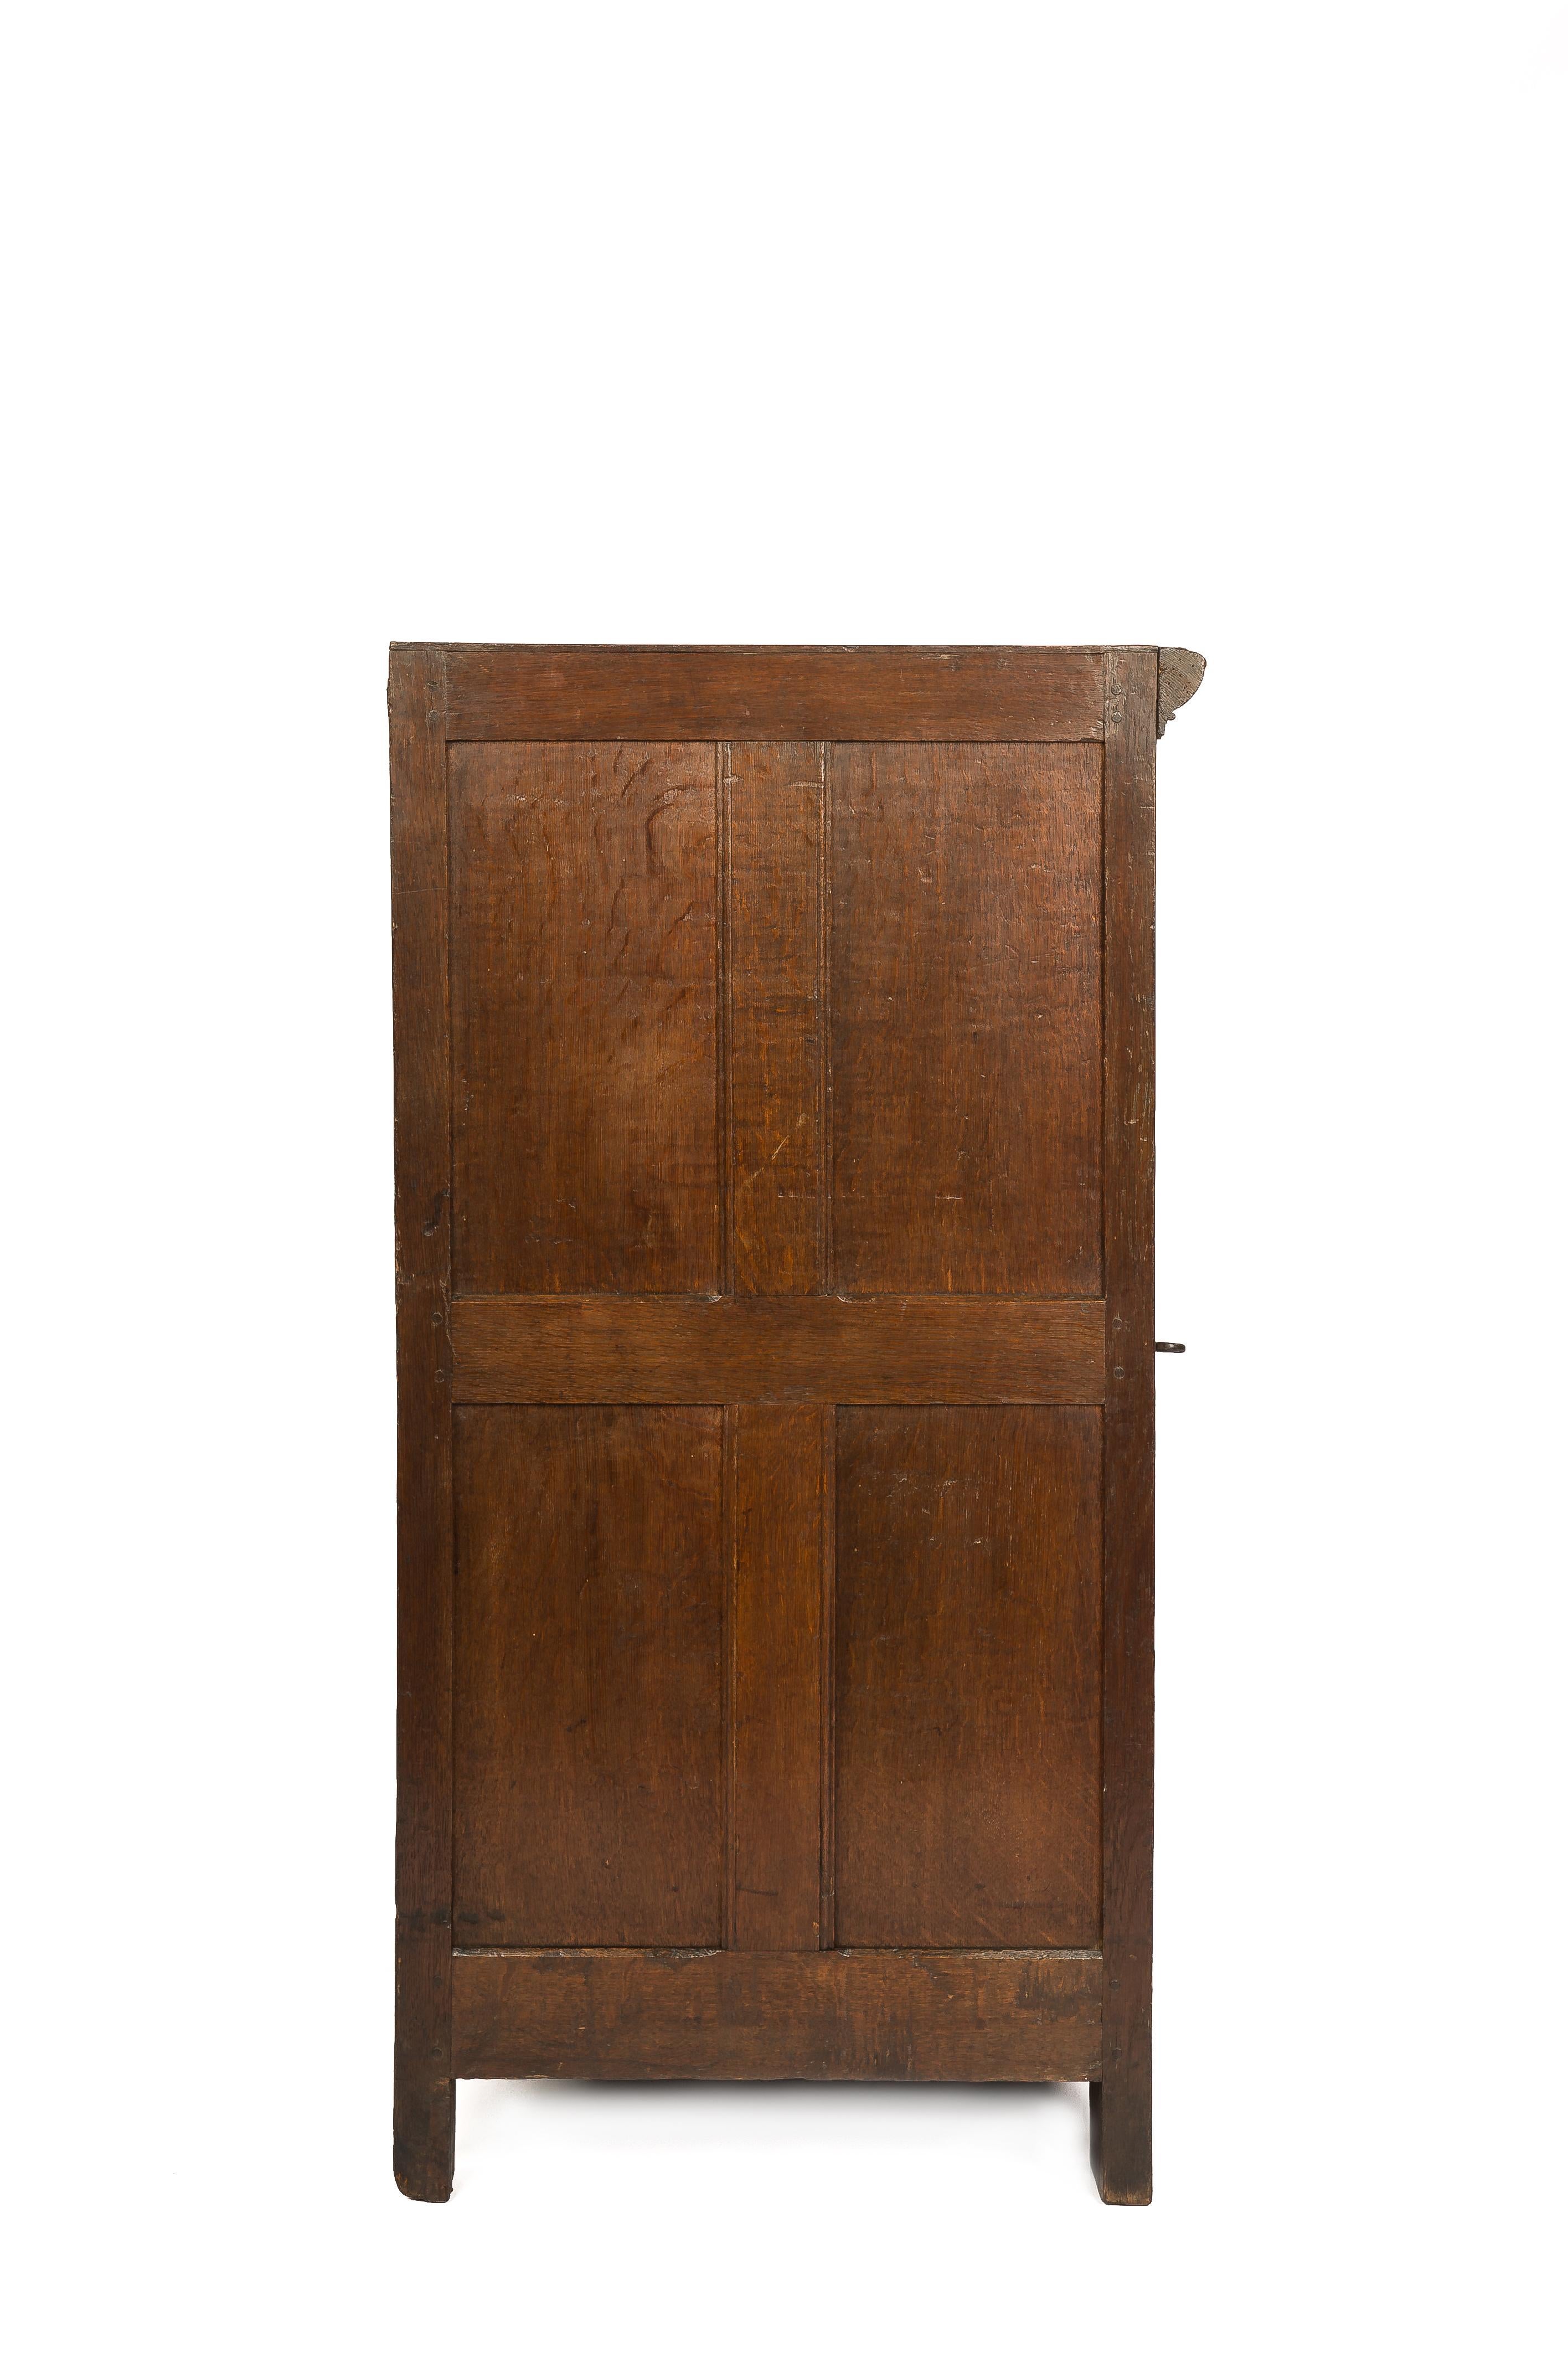 This elegant single-door cabinet was made in the Southern part of the Netherlands in the late 17th century. It was made in the best quality quarter-sawn oak in the tradition of the Dutch Renaissance during the “Dutch golden age”. The piece is of